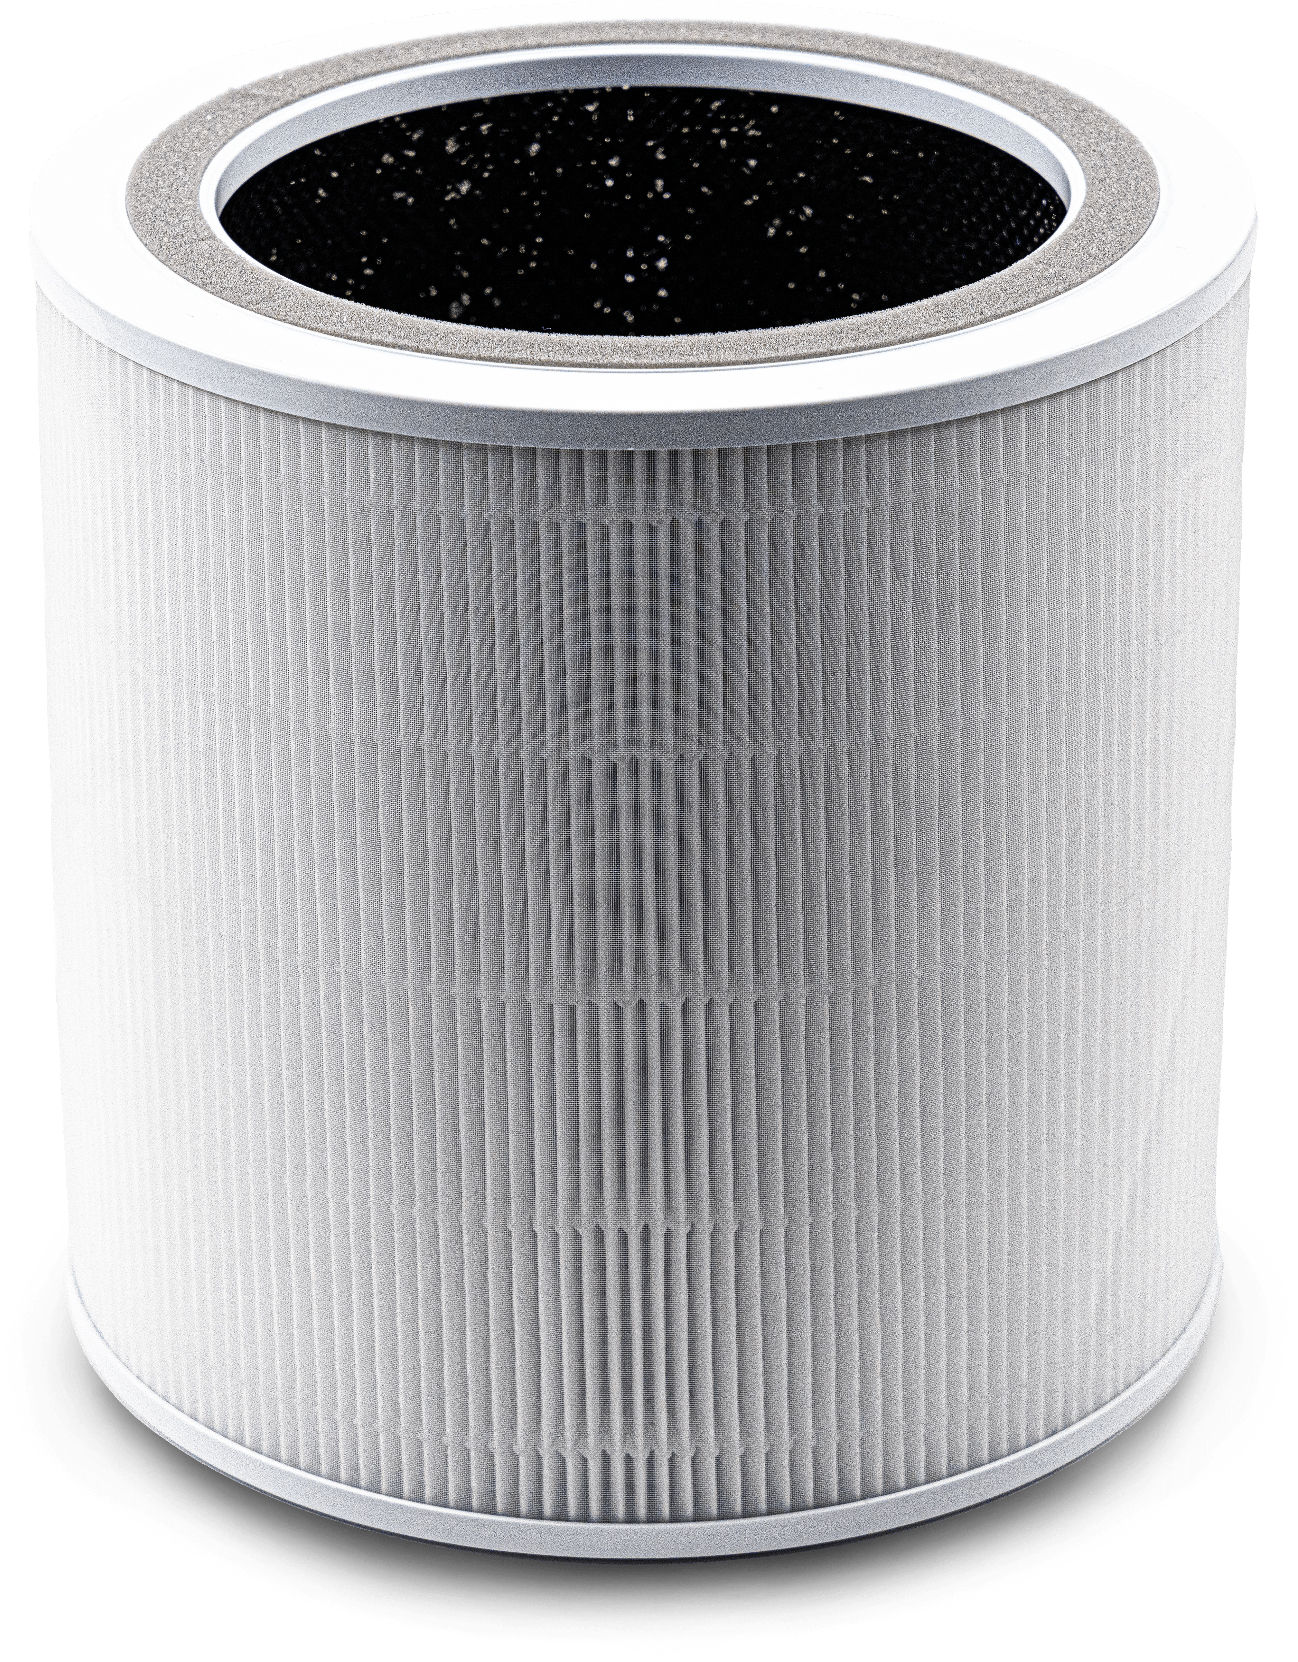 Levoit Air Cleaner Filter Core 400S True HEPA 3-Stage